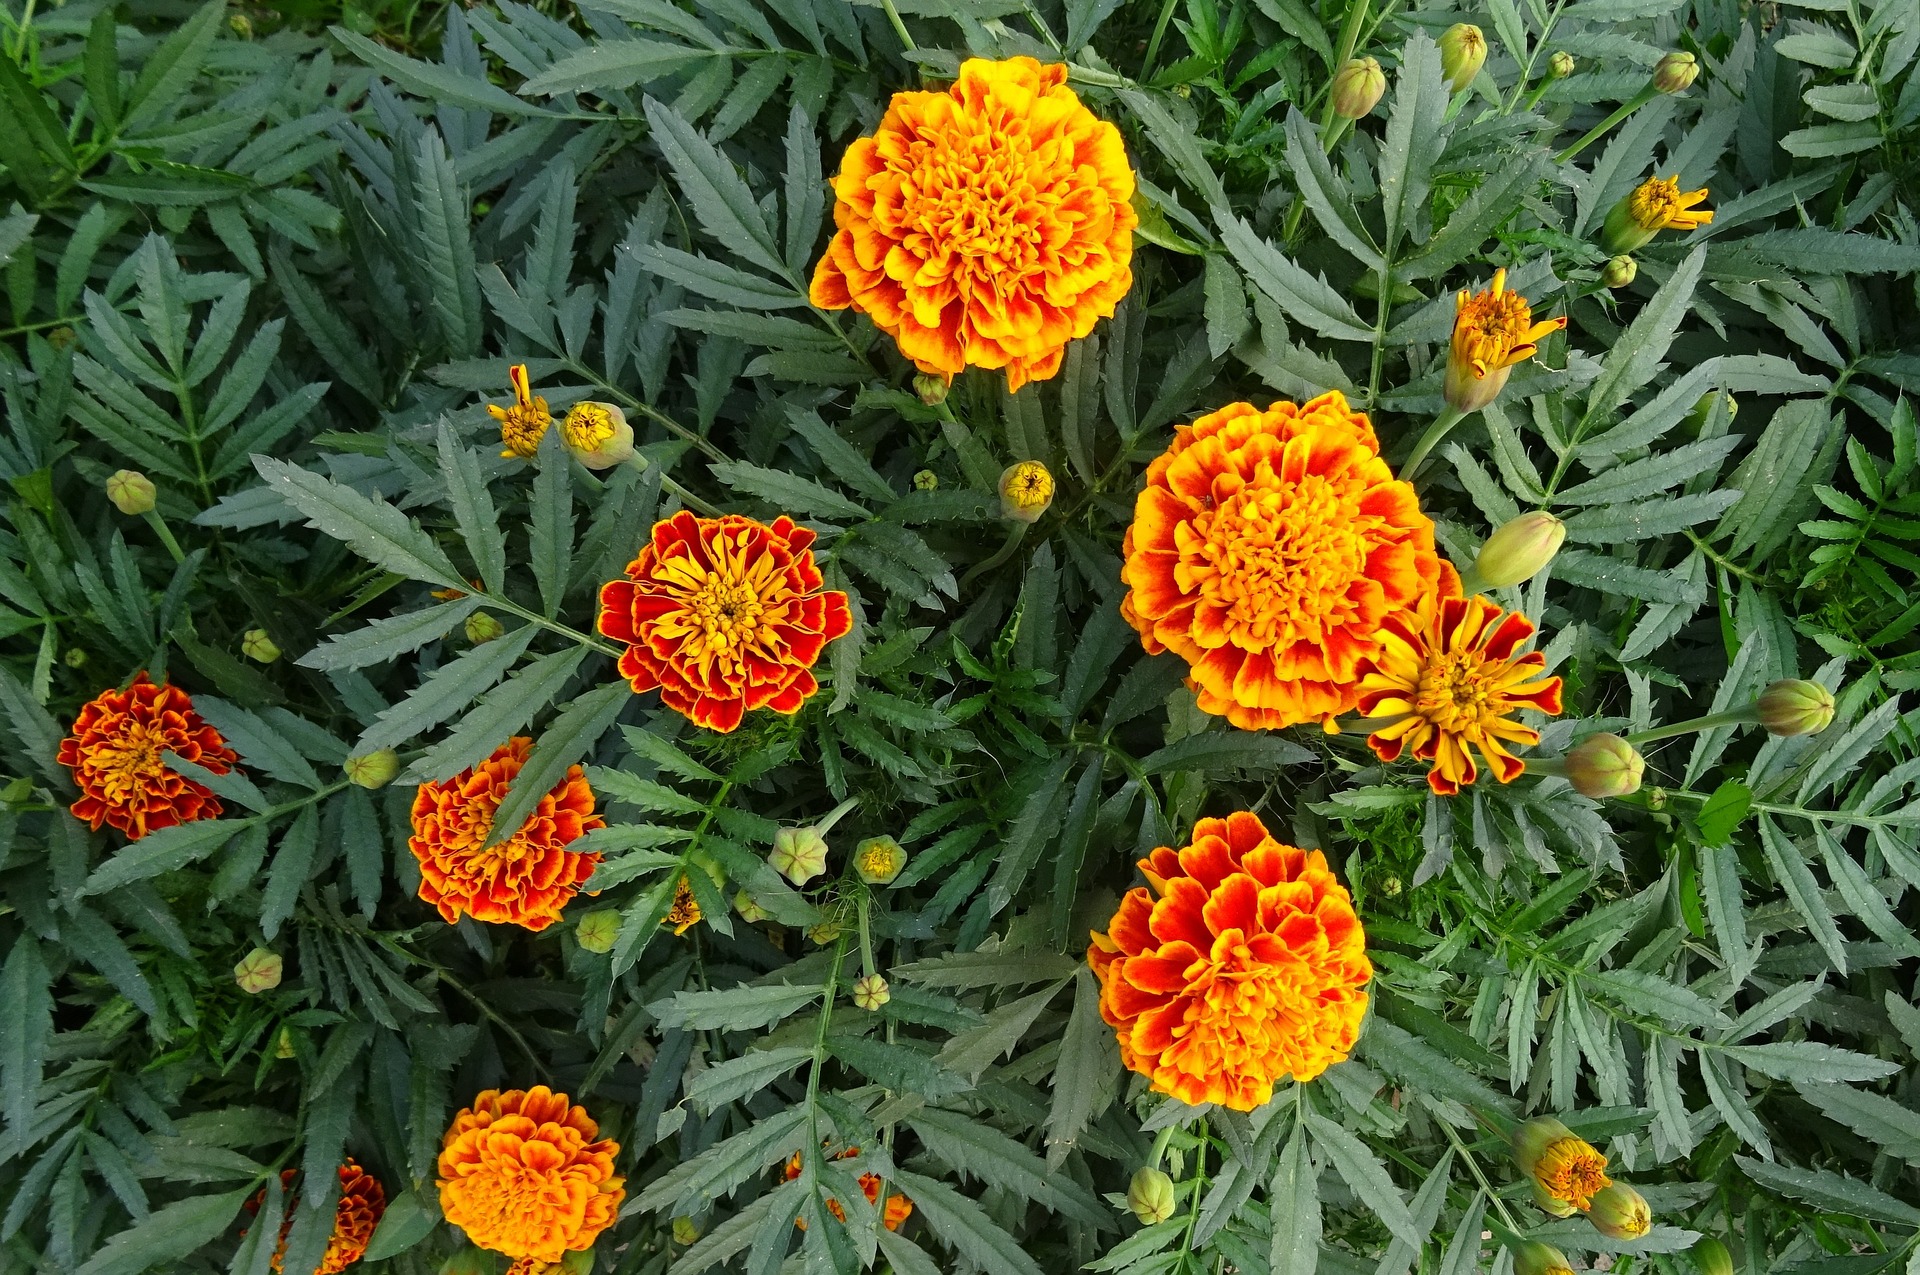 Marigolds: How to Plant and Grow Marigold Flowers | The Old Farmer's ...